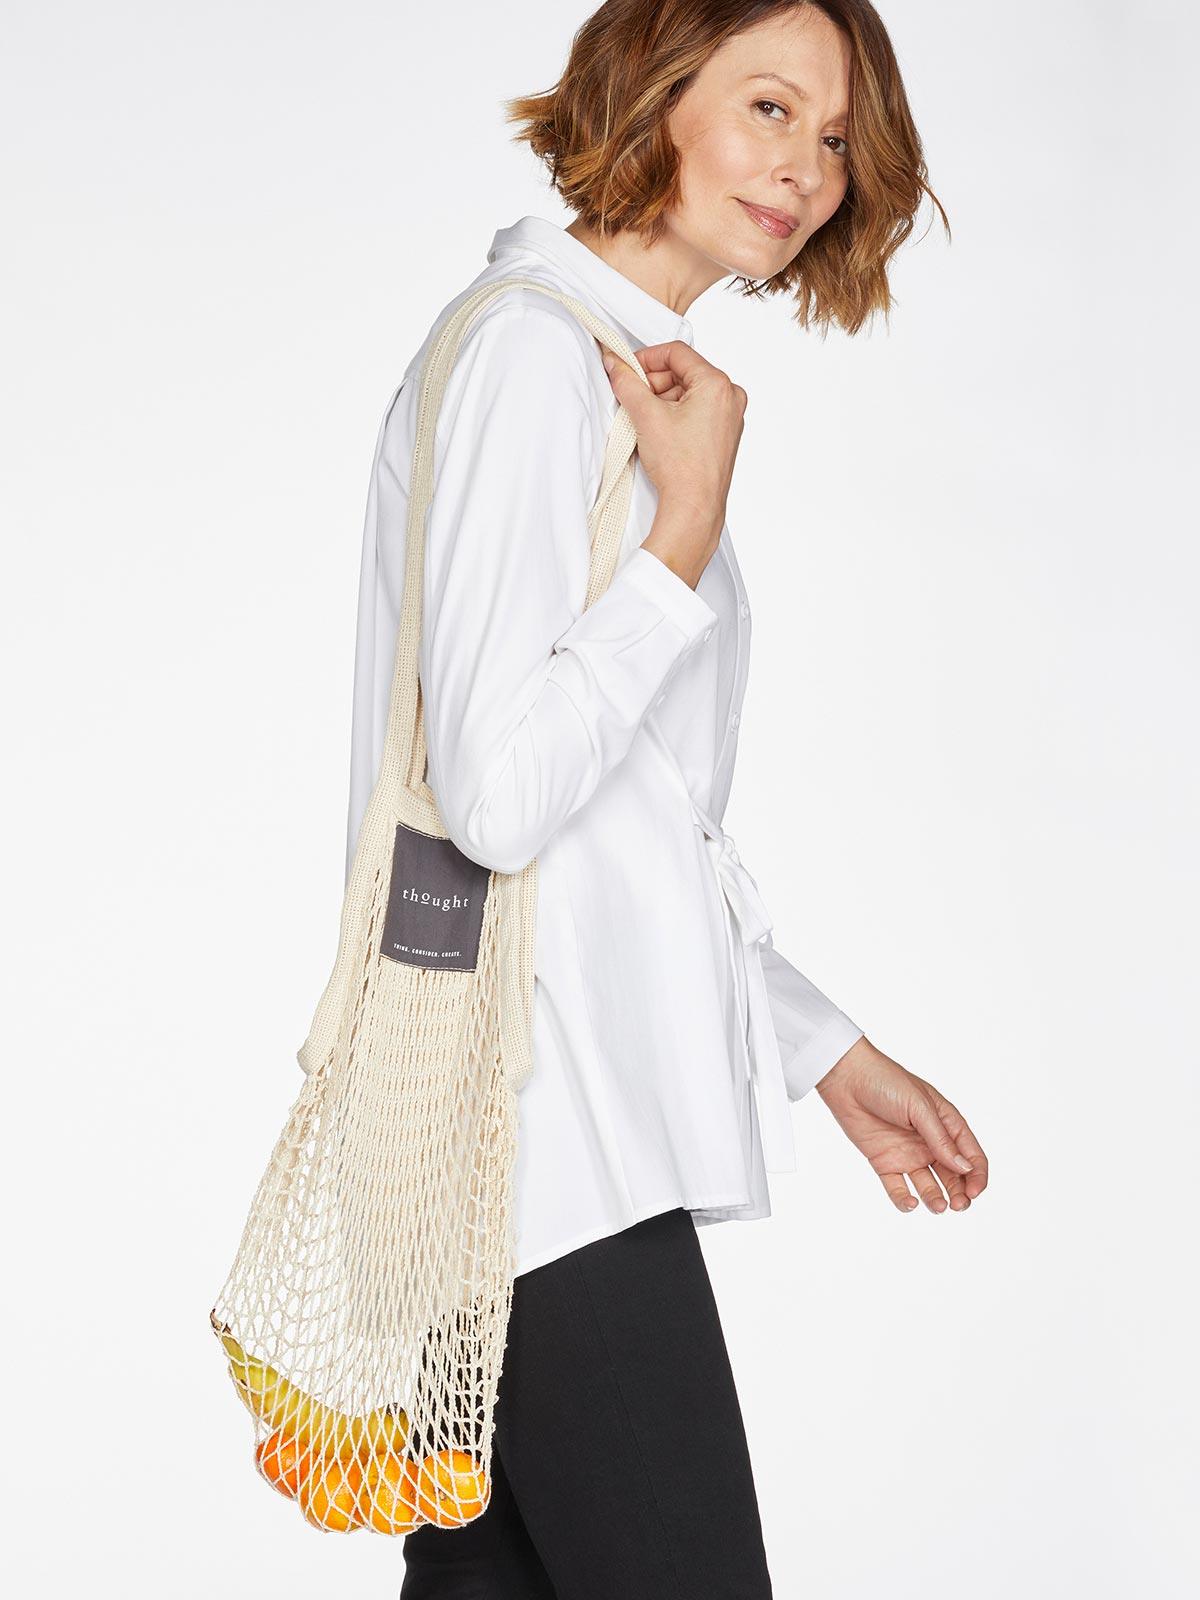 Thought Organic Cotton String Bag - Thought Clothing UK